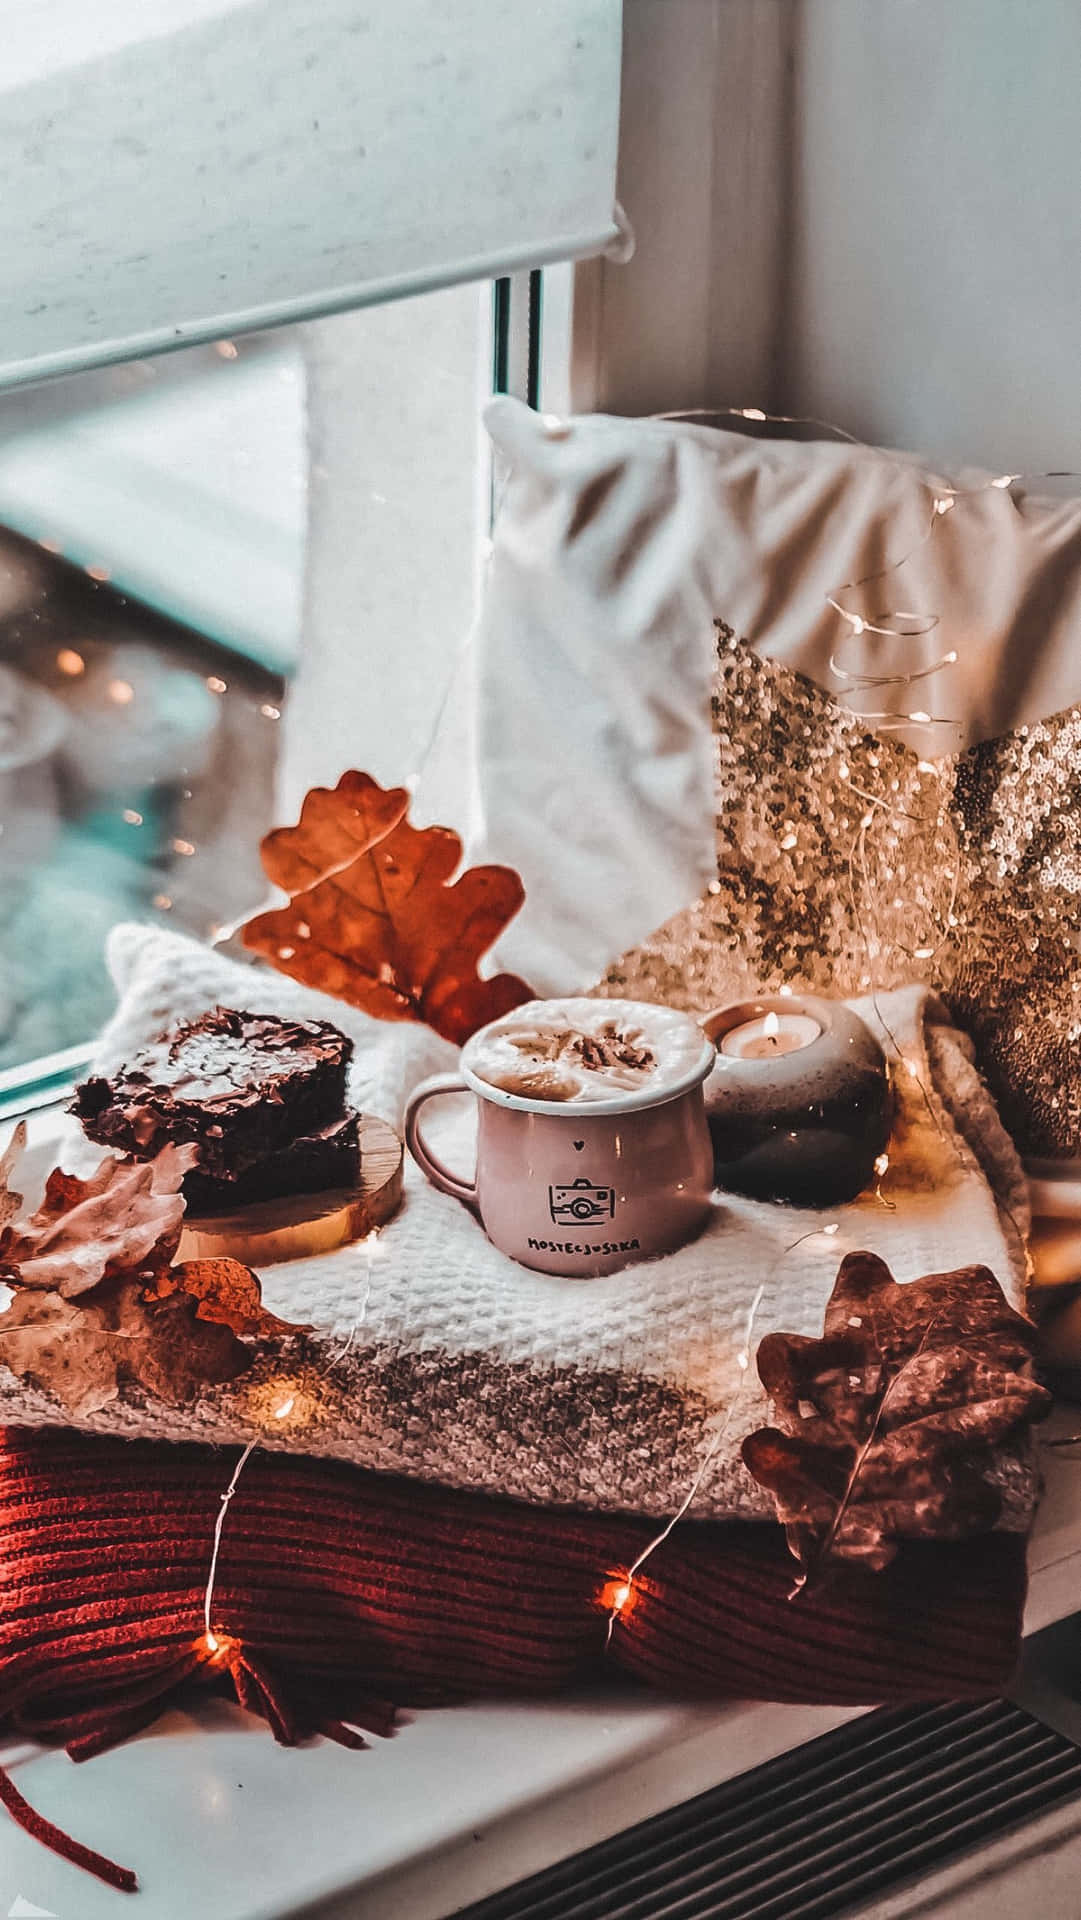 A cozy autumn aesthetic with chocolates by the windowpane - Chocolate